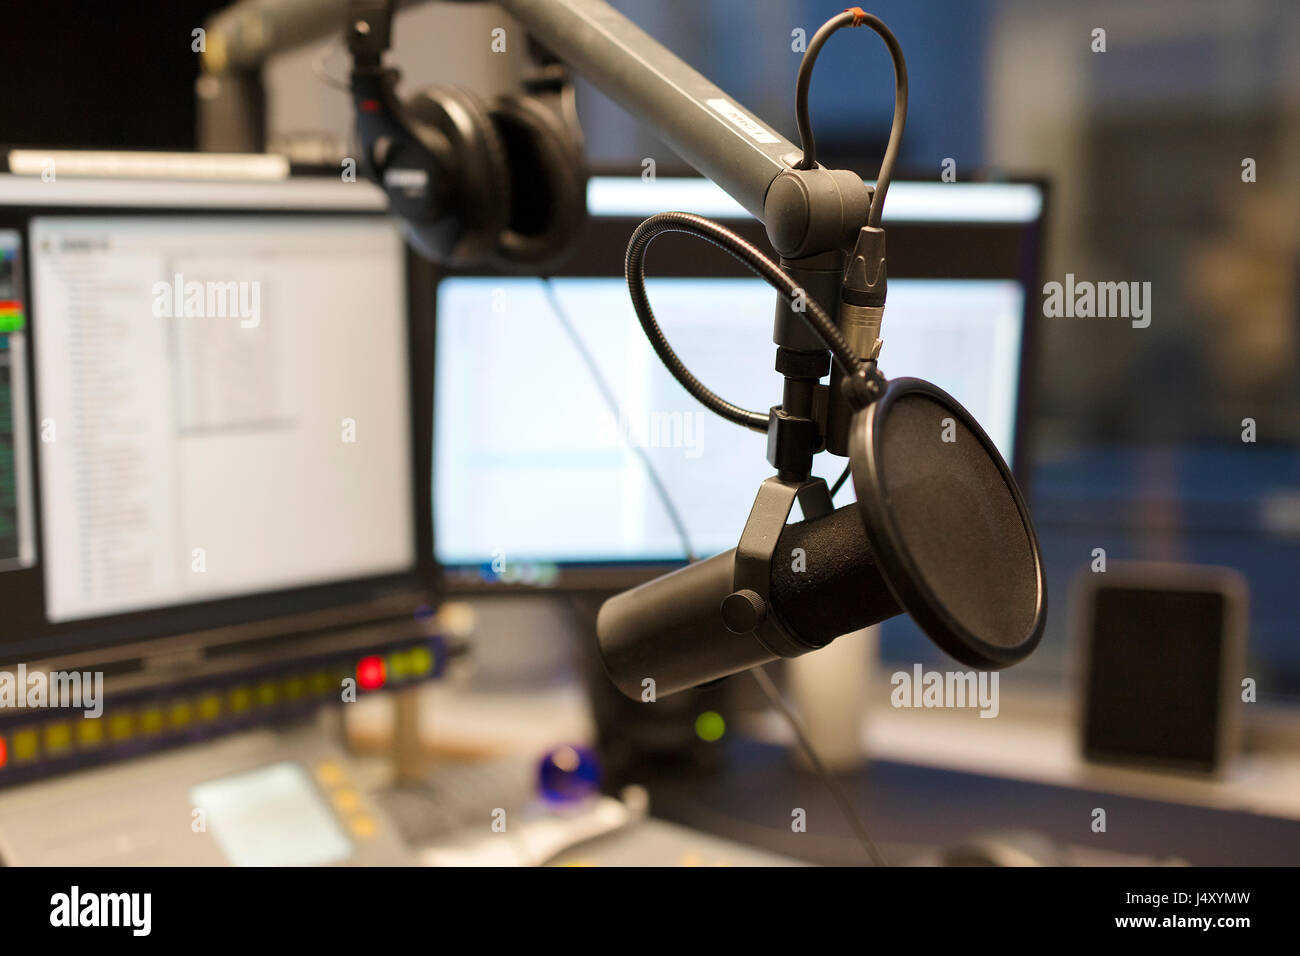 Studio microphone in front of radio station broadcasting equipment Stock Photo